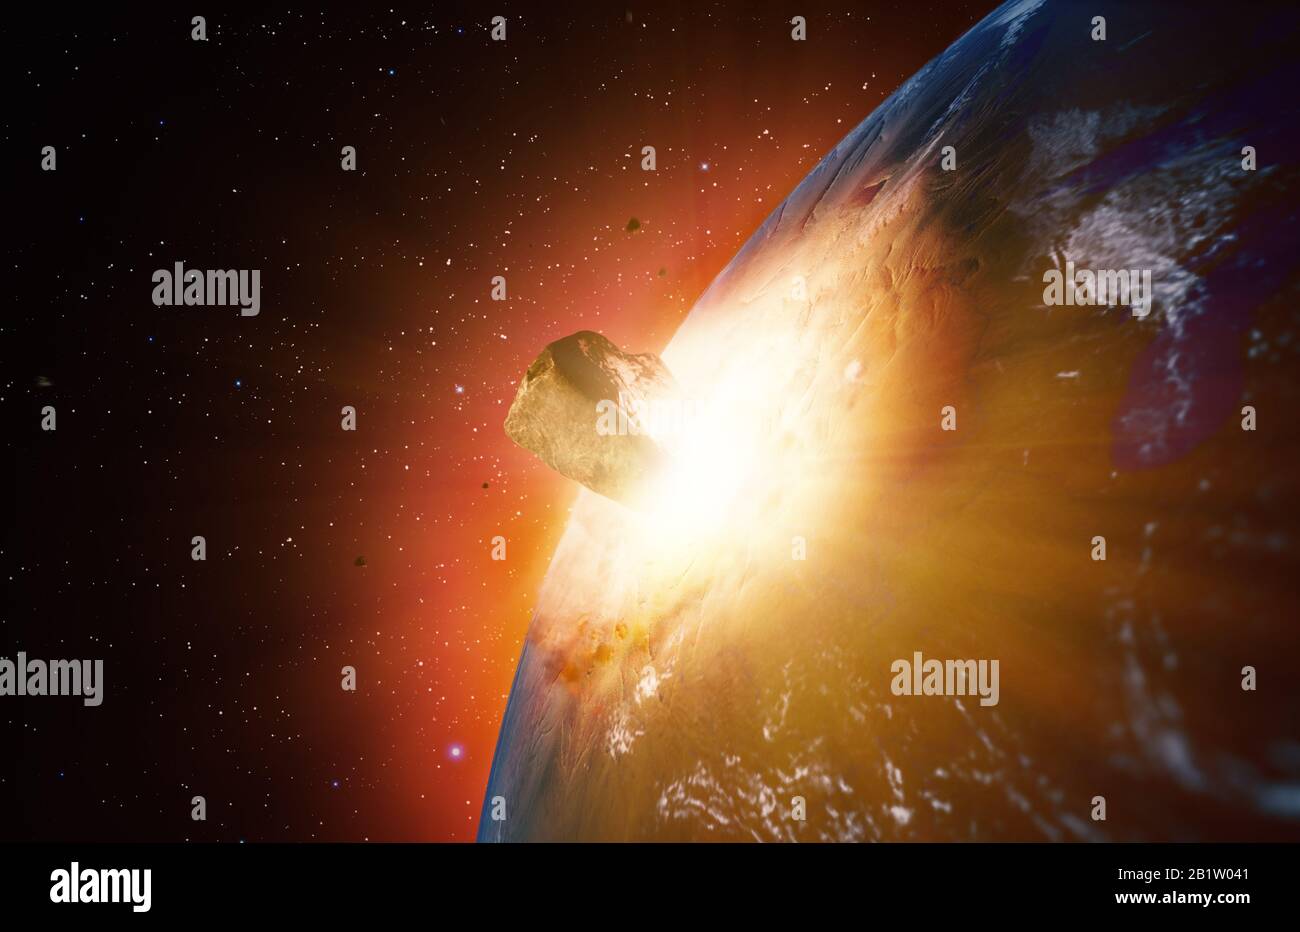 Huge asteroid impacting Earth - 3D illustration Stock Photo